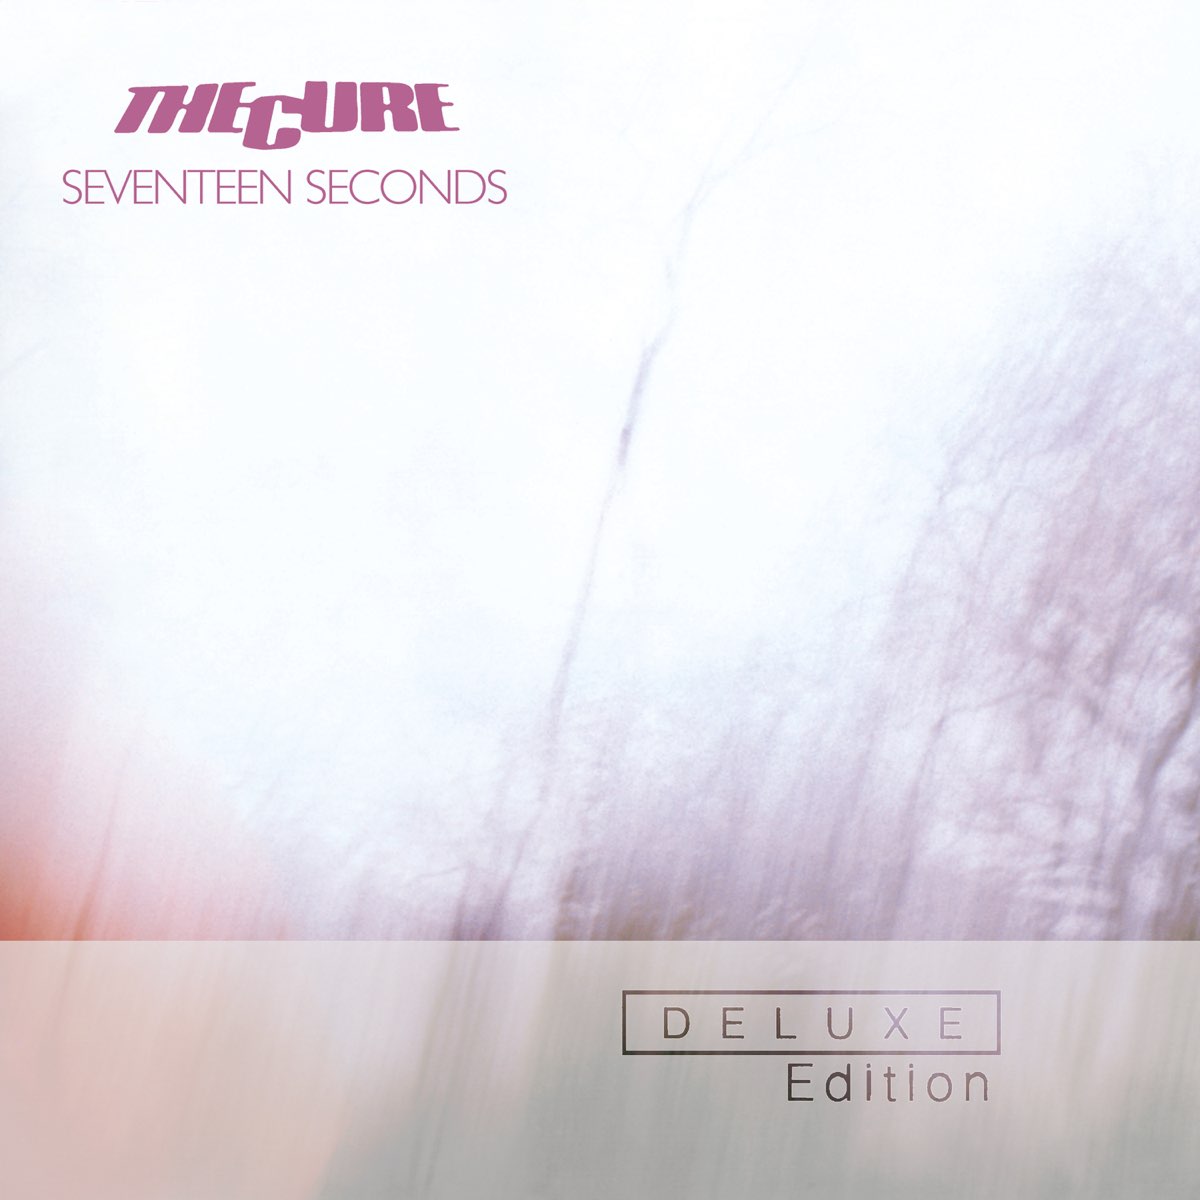 17 seconds. The Cure Seventeen seconds обложка. The Cure Seventeen seconds 1980. The Cure Seventeen seconds LP. Seventeen seconds the Cure концерт.